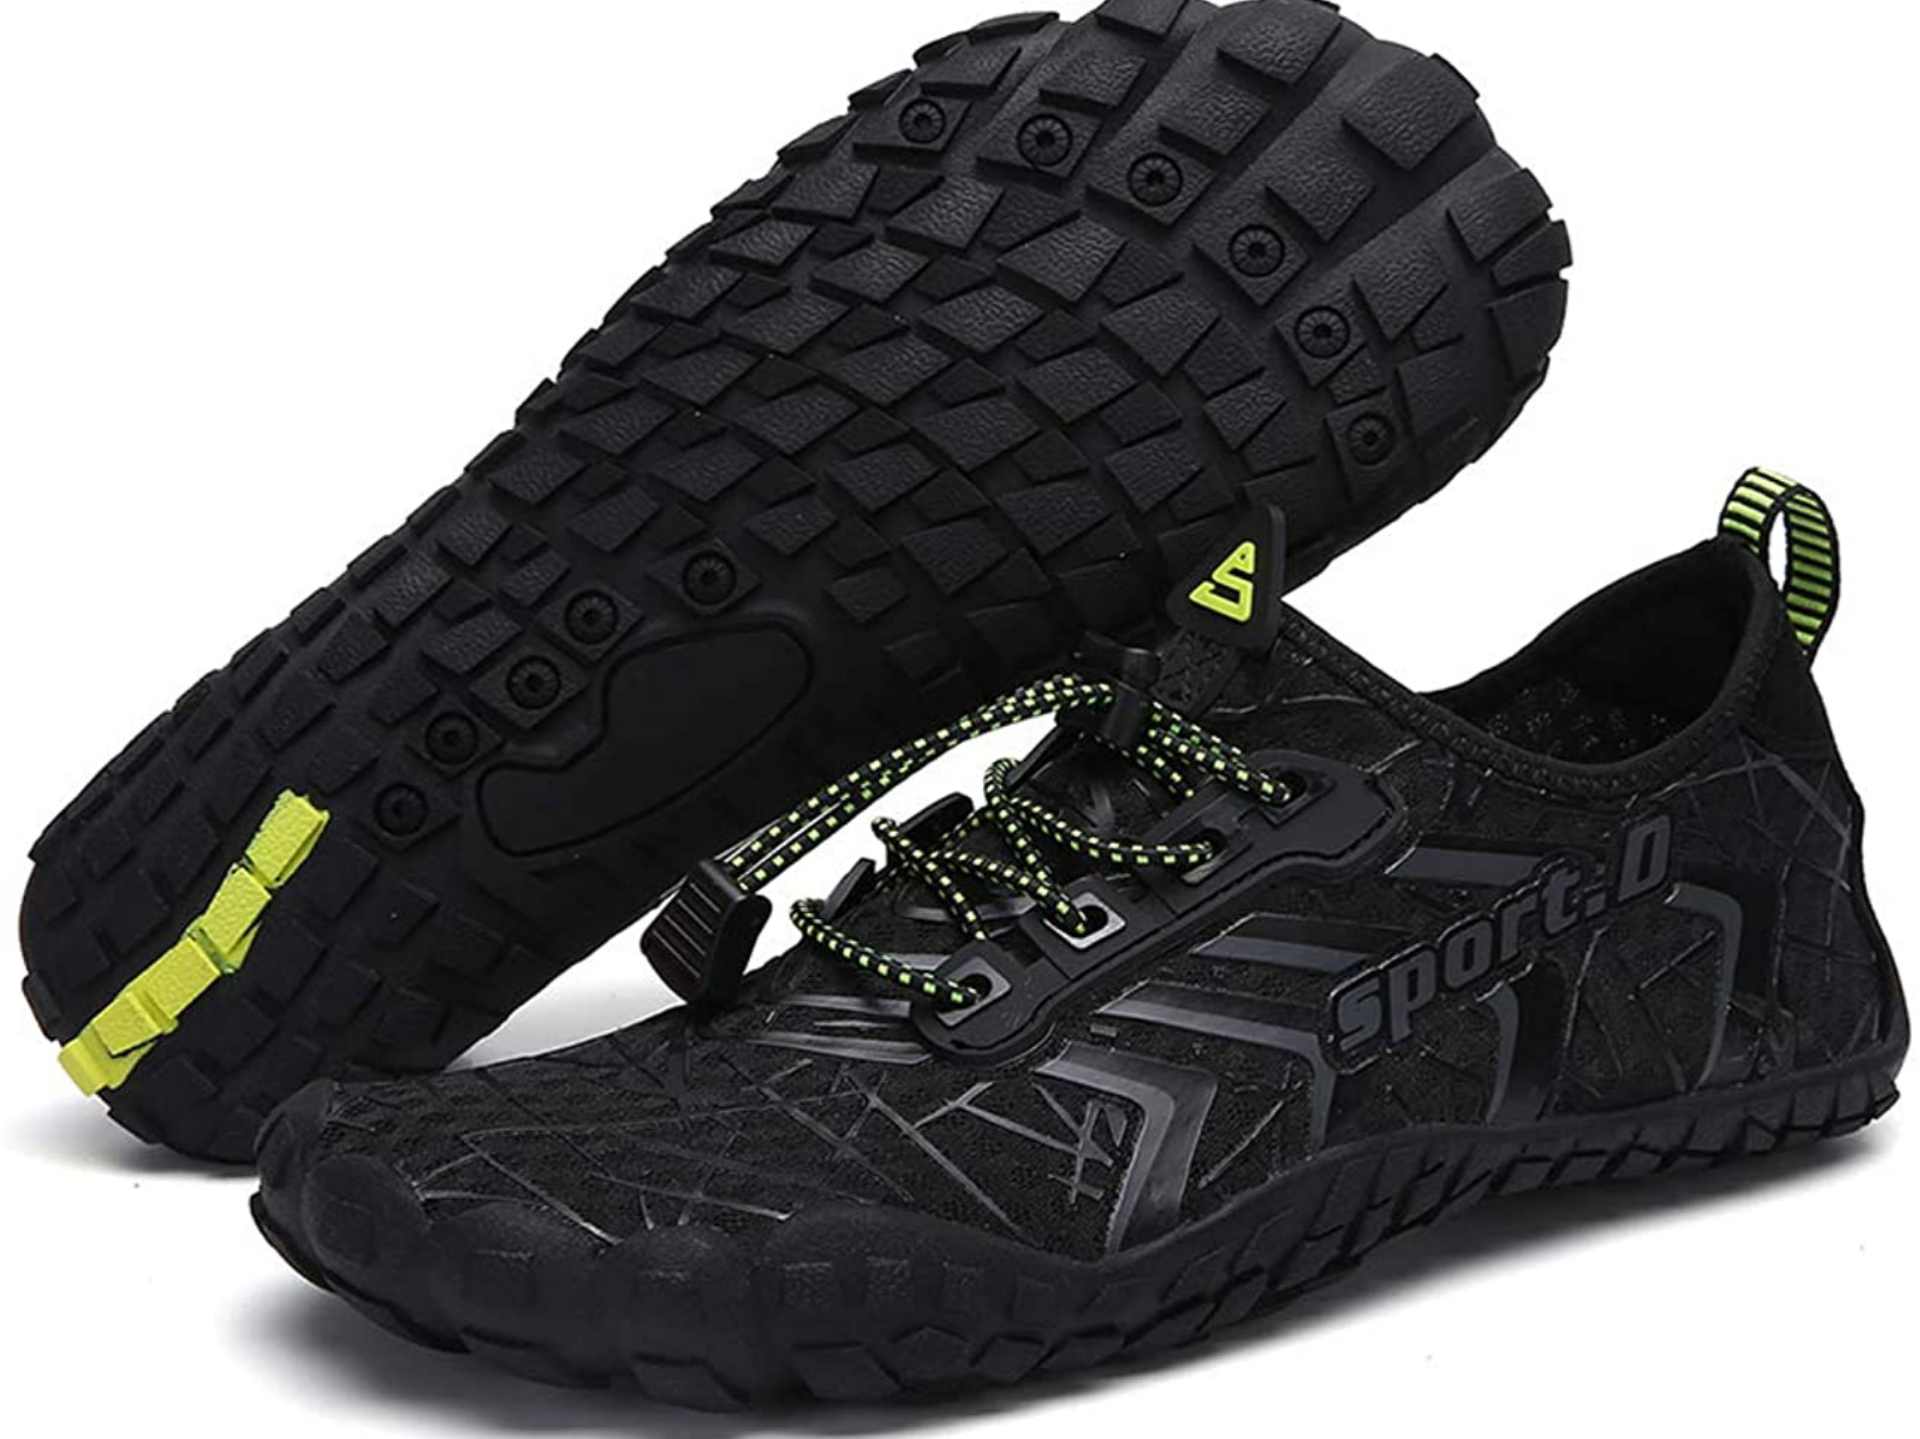 What is a Water Shoe? (Definition, Benefits, & Buying Guide) in 2021